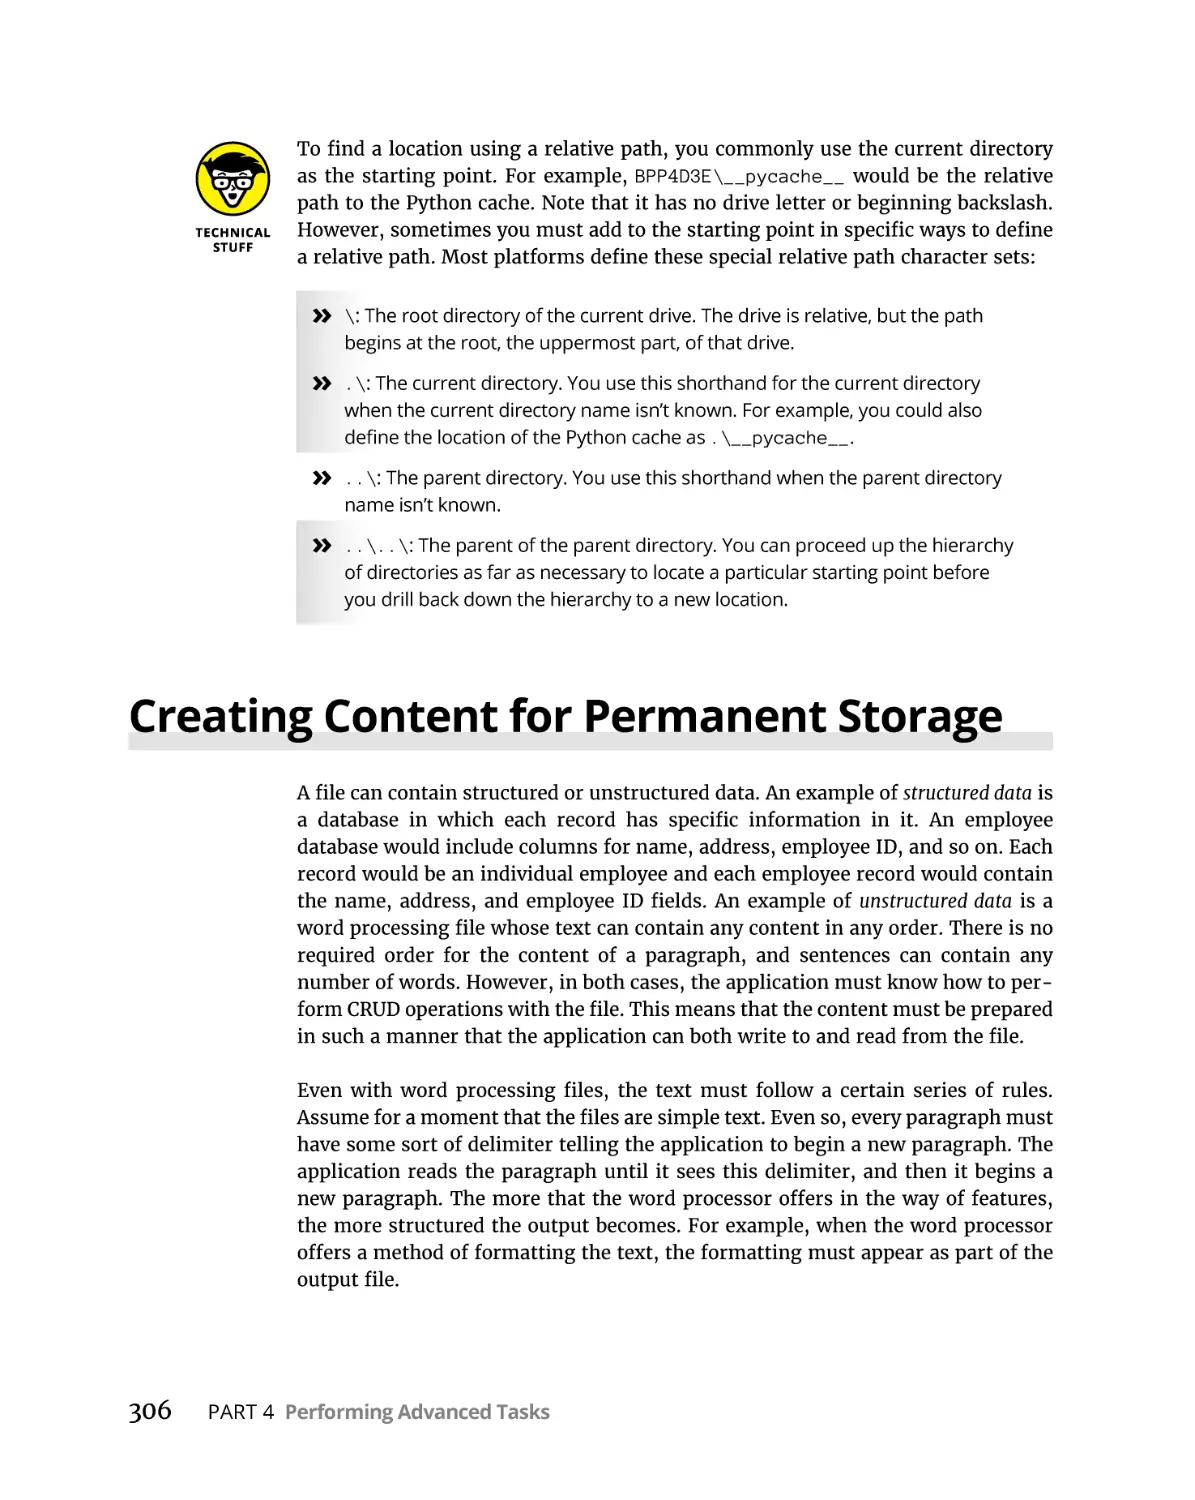 Creating Content for Permanent Storage